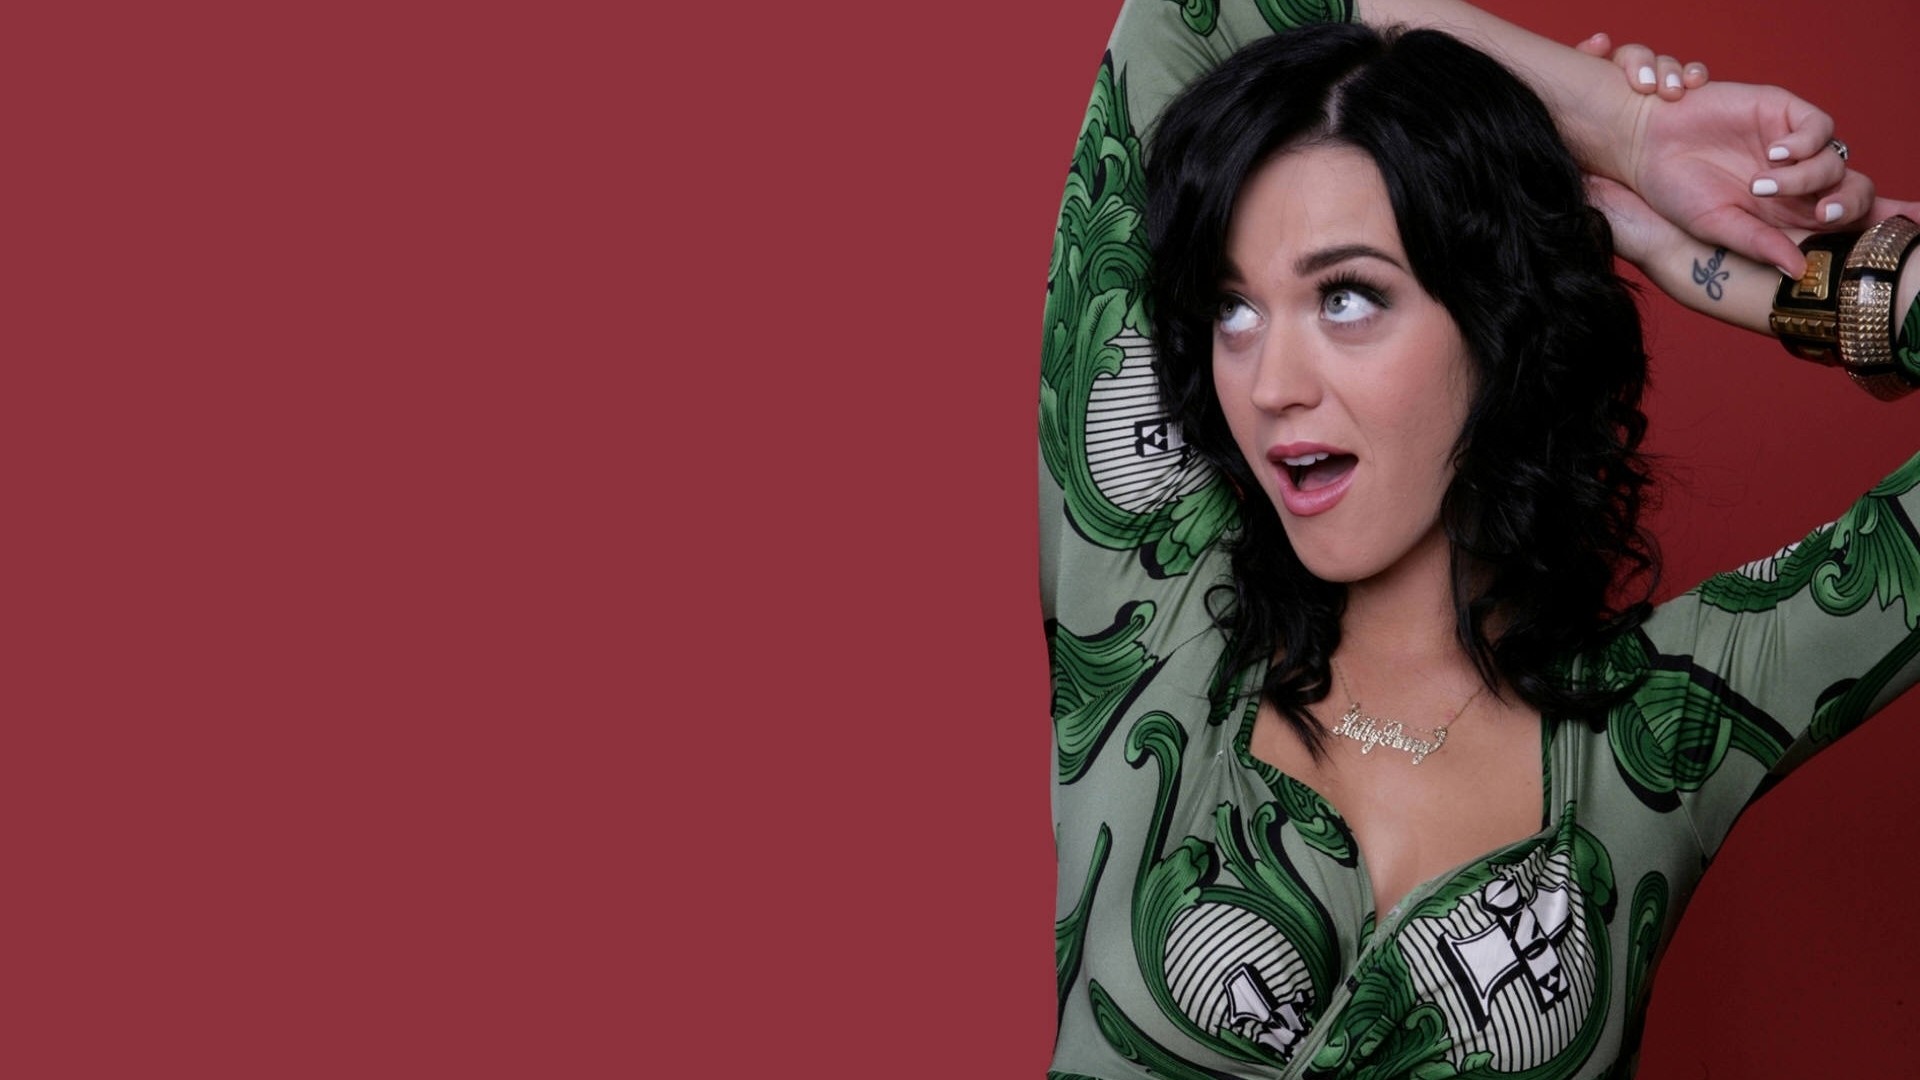 People 1920x1080 Katy Perry singer women green dress arms up celebrity red background simple background black hair looking up open mouth necklace bracelets shoulder length hair